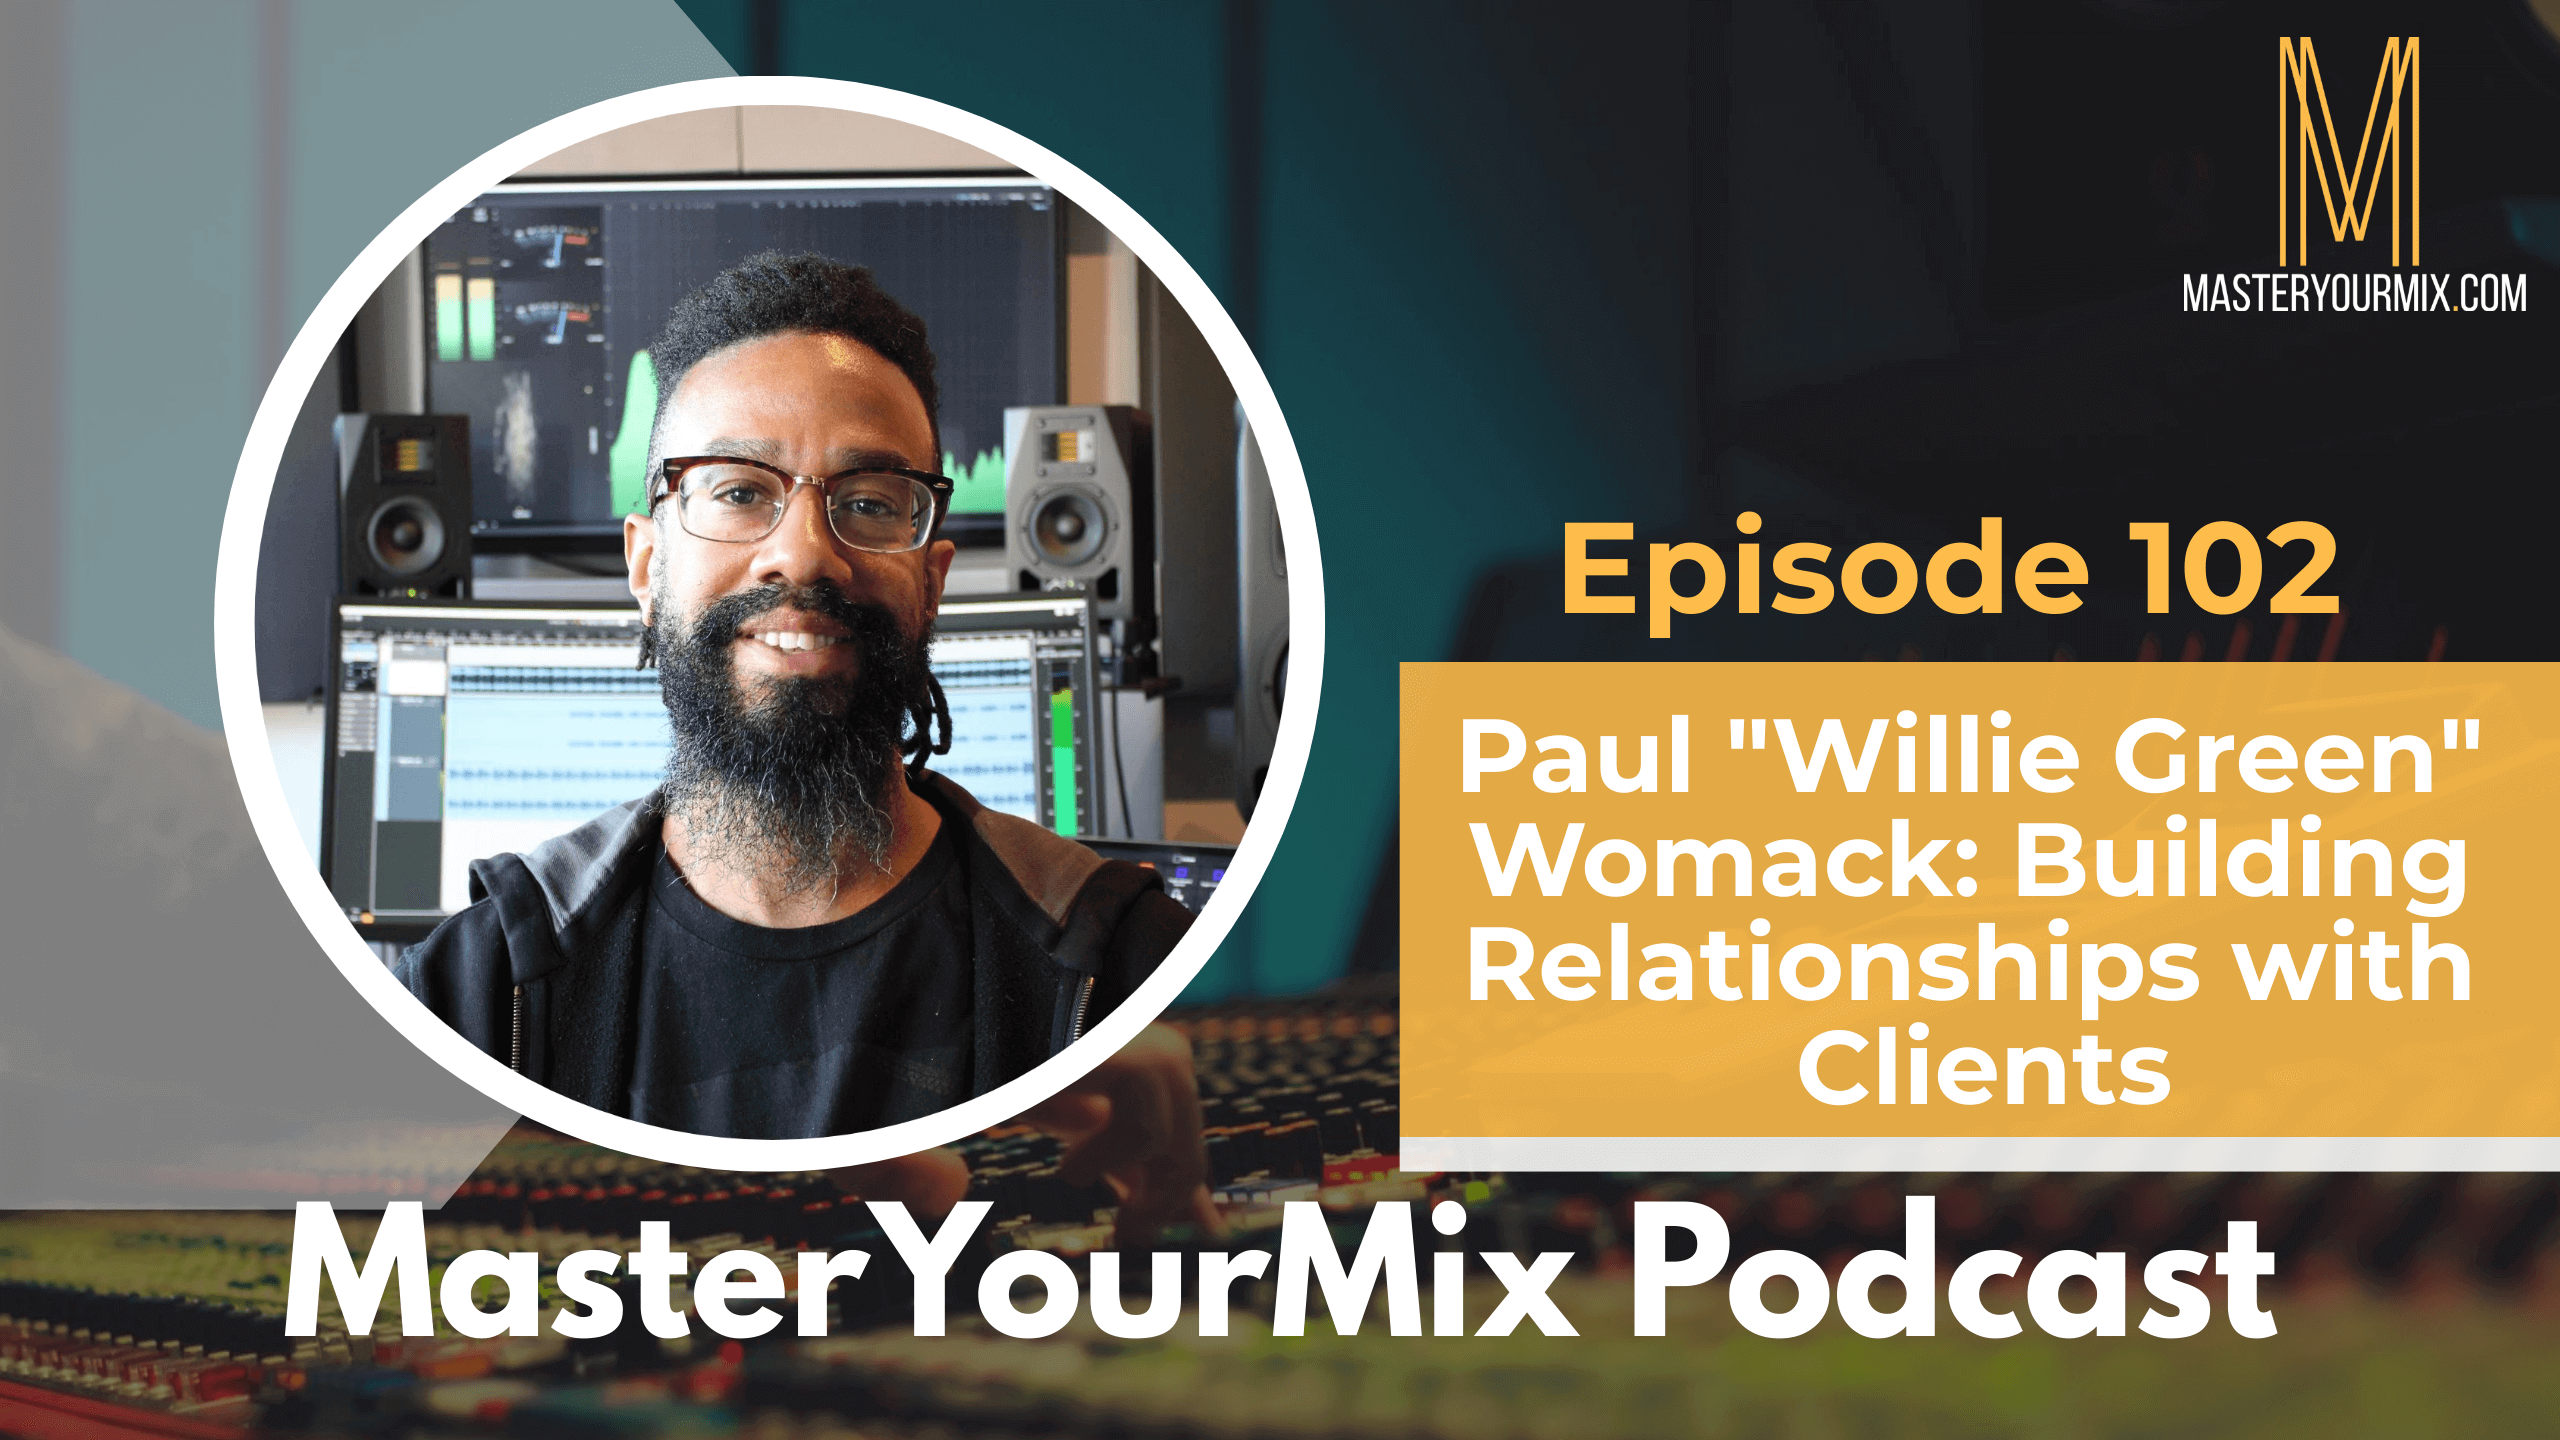 master your mix podcast, ep 102 Paul "Willie Green" Womack